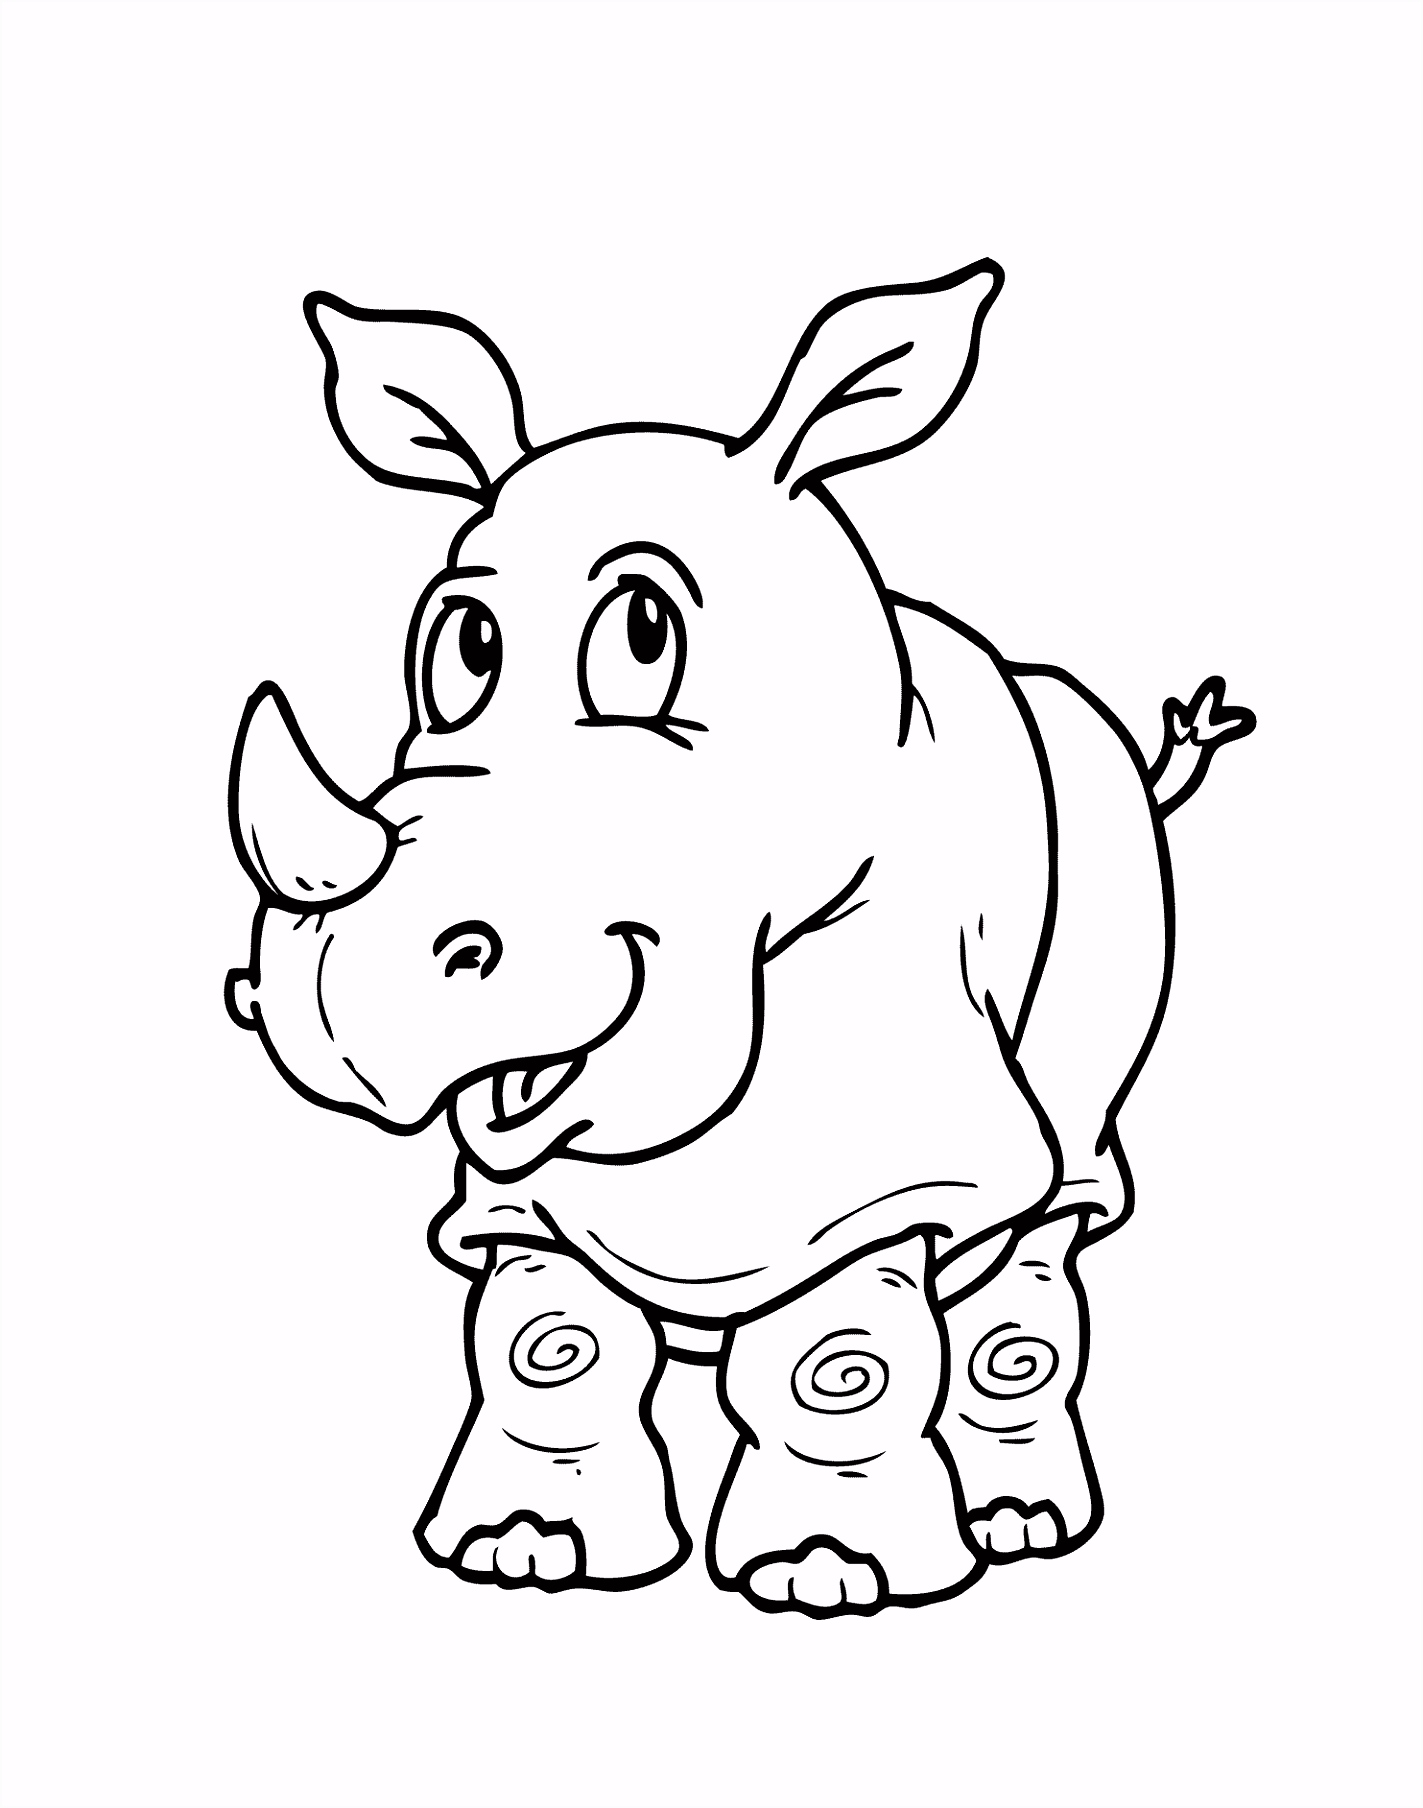 Rhinoceros cartoon animals coloring pages for kids printable free